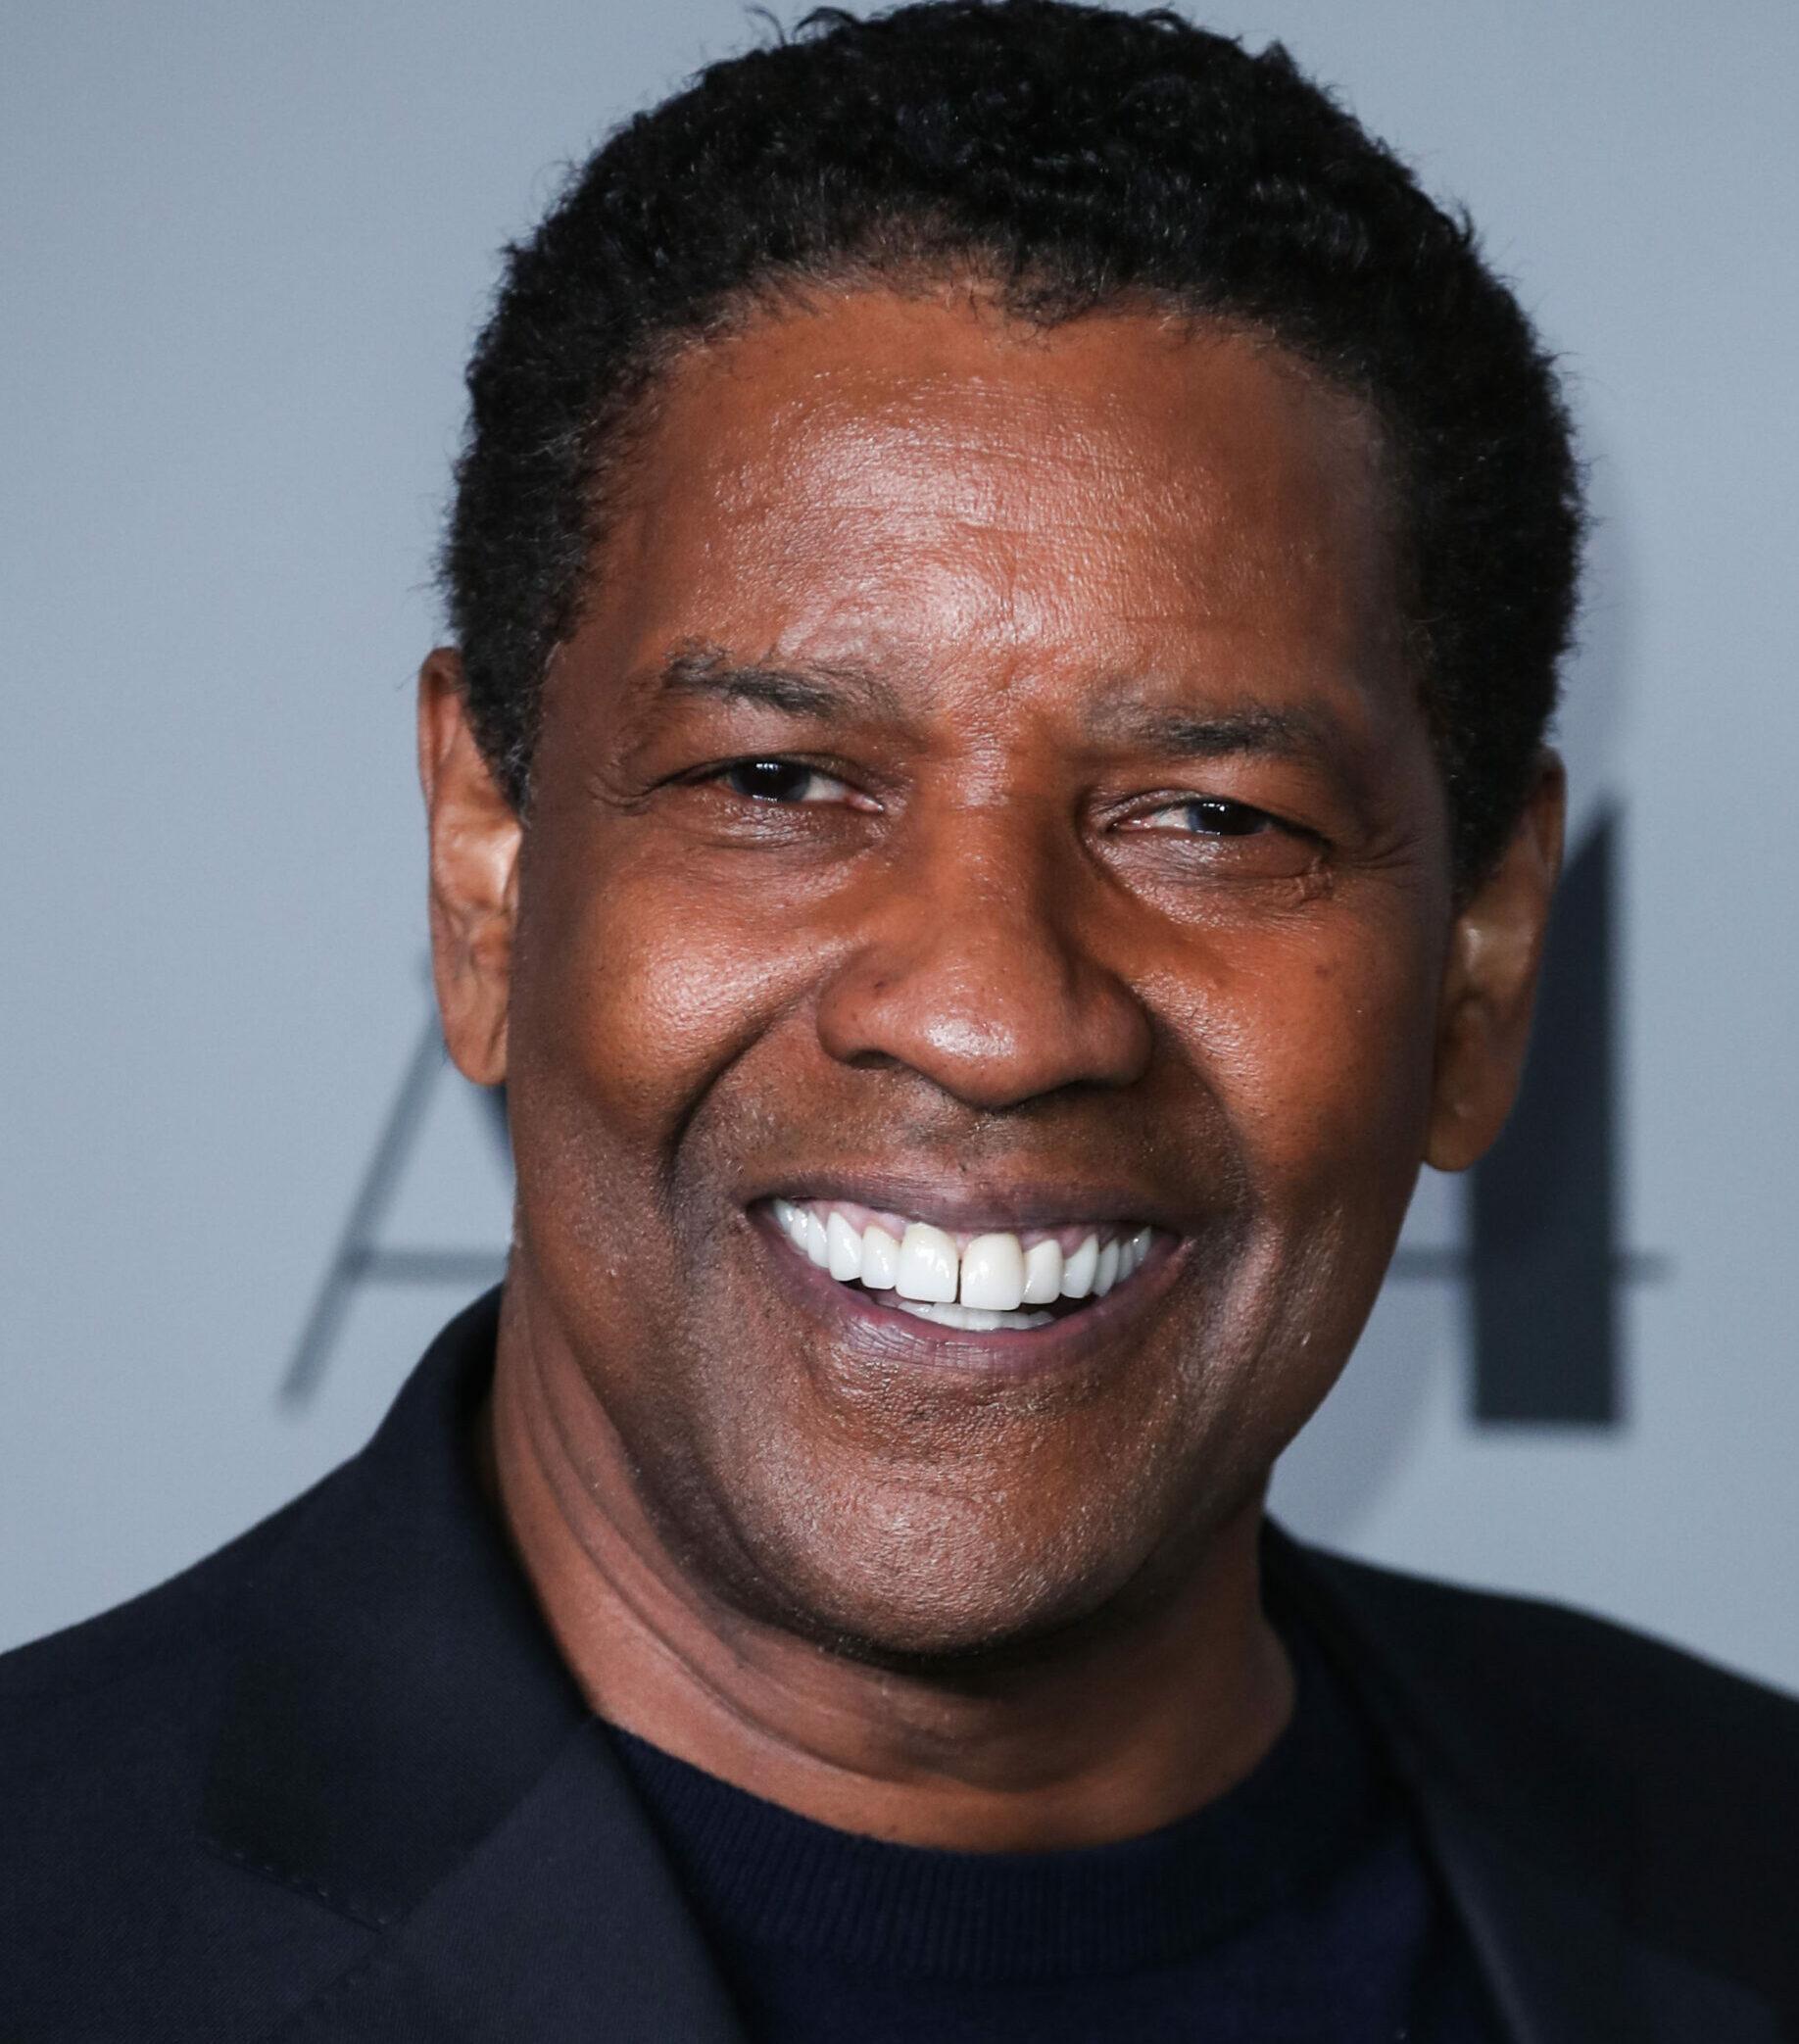 Los Angeles Premiere Of Apple Original Films' and A24's 'The Tragedy Of Macbeth' held at the Directors Guild of America Theater Complex on December 16, 2021 in Los Angeles, California, United States. 16 Dec 2021 Pictured: Denzel Washington.